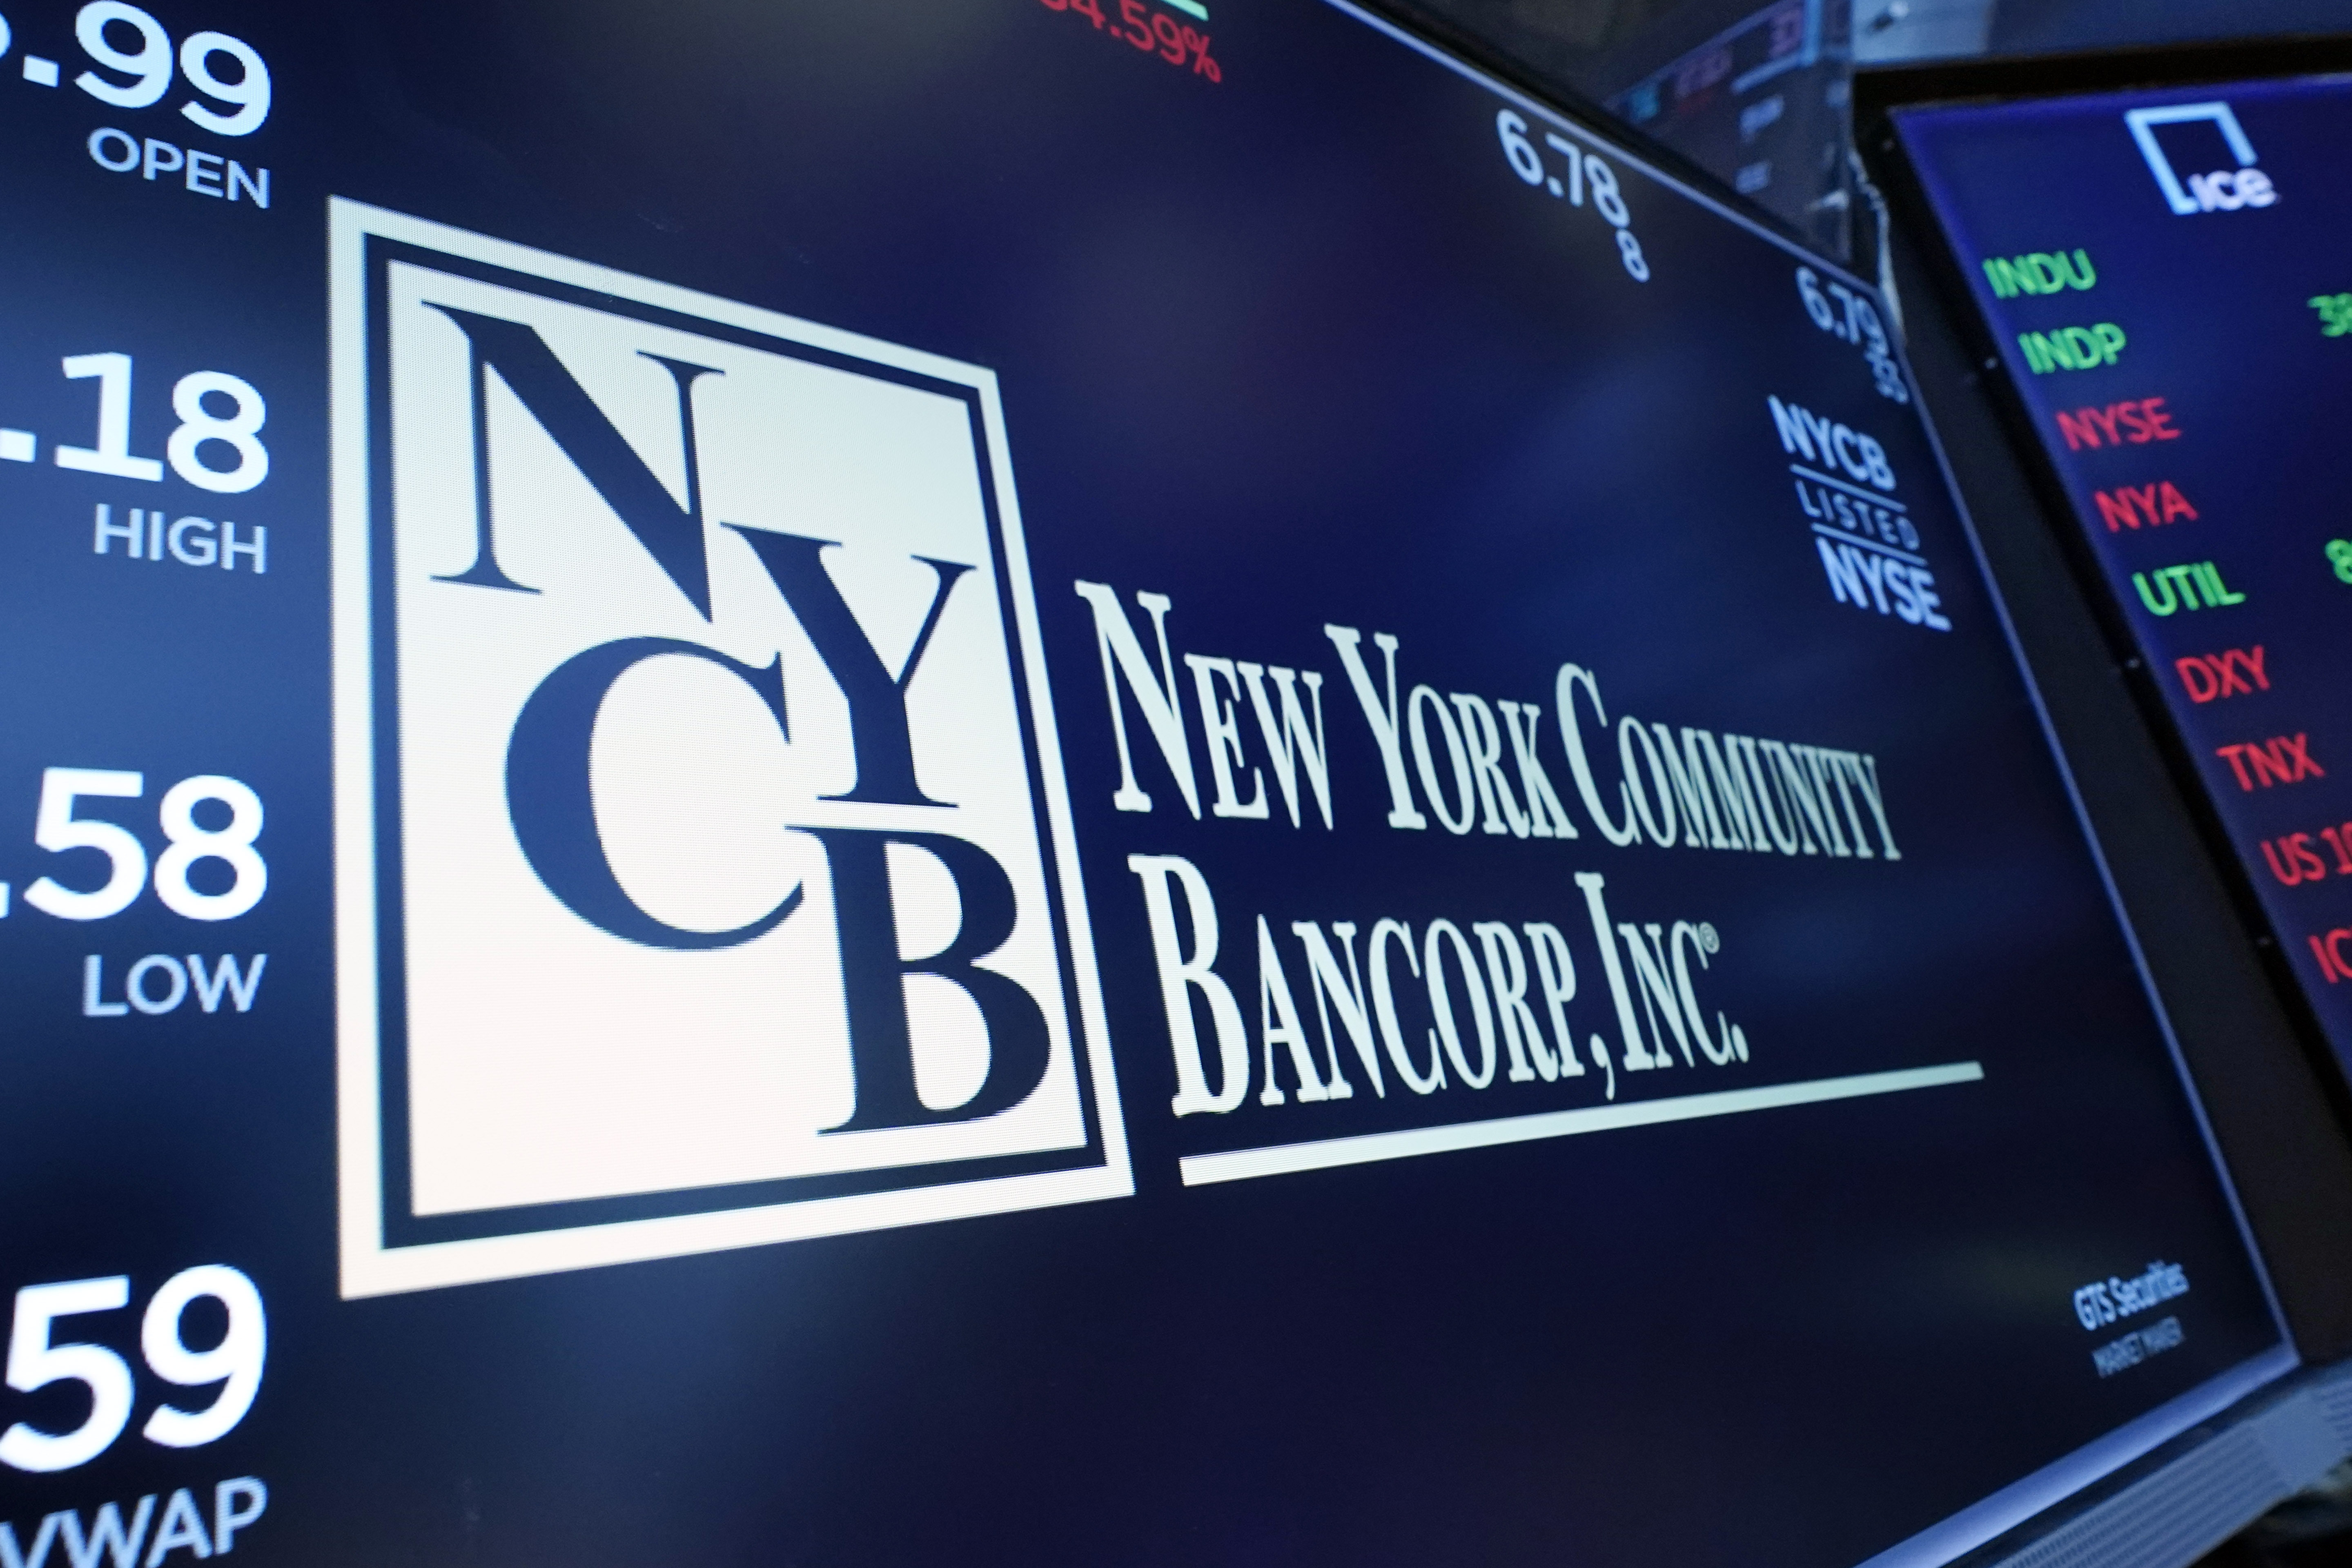 New York Community Bancorp tries to reassure investors as stock continues  to wobble